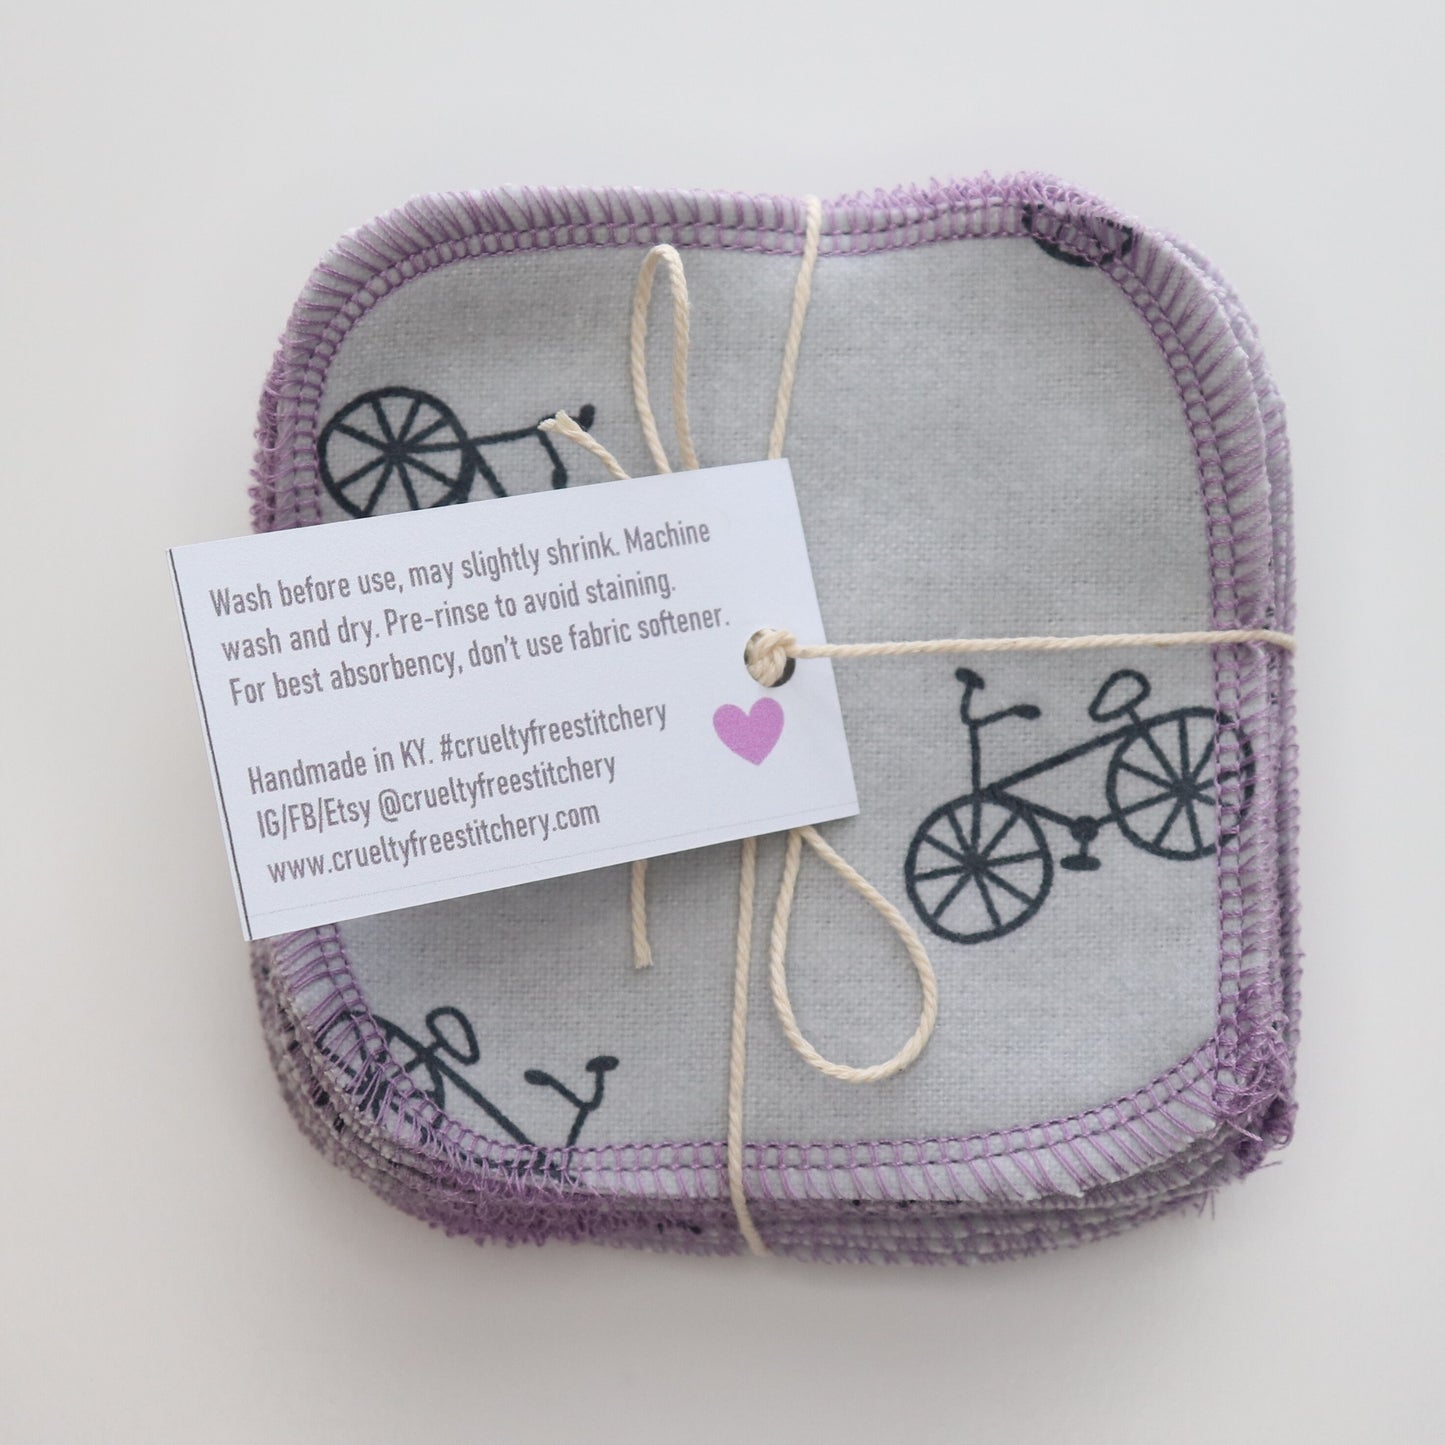 Bundled cotton rounds with the back of the tag showing, explaining care instructions.